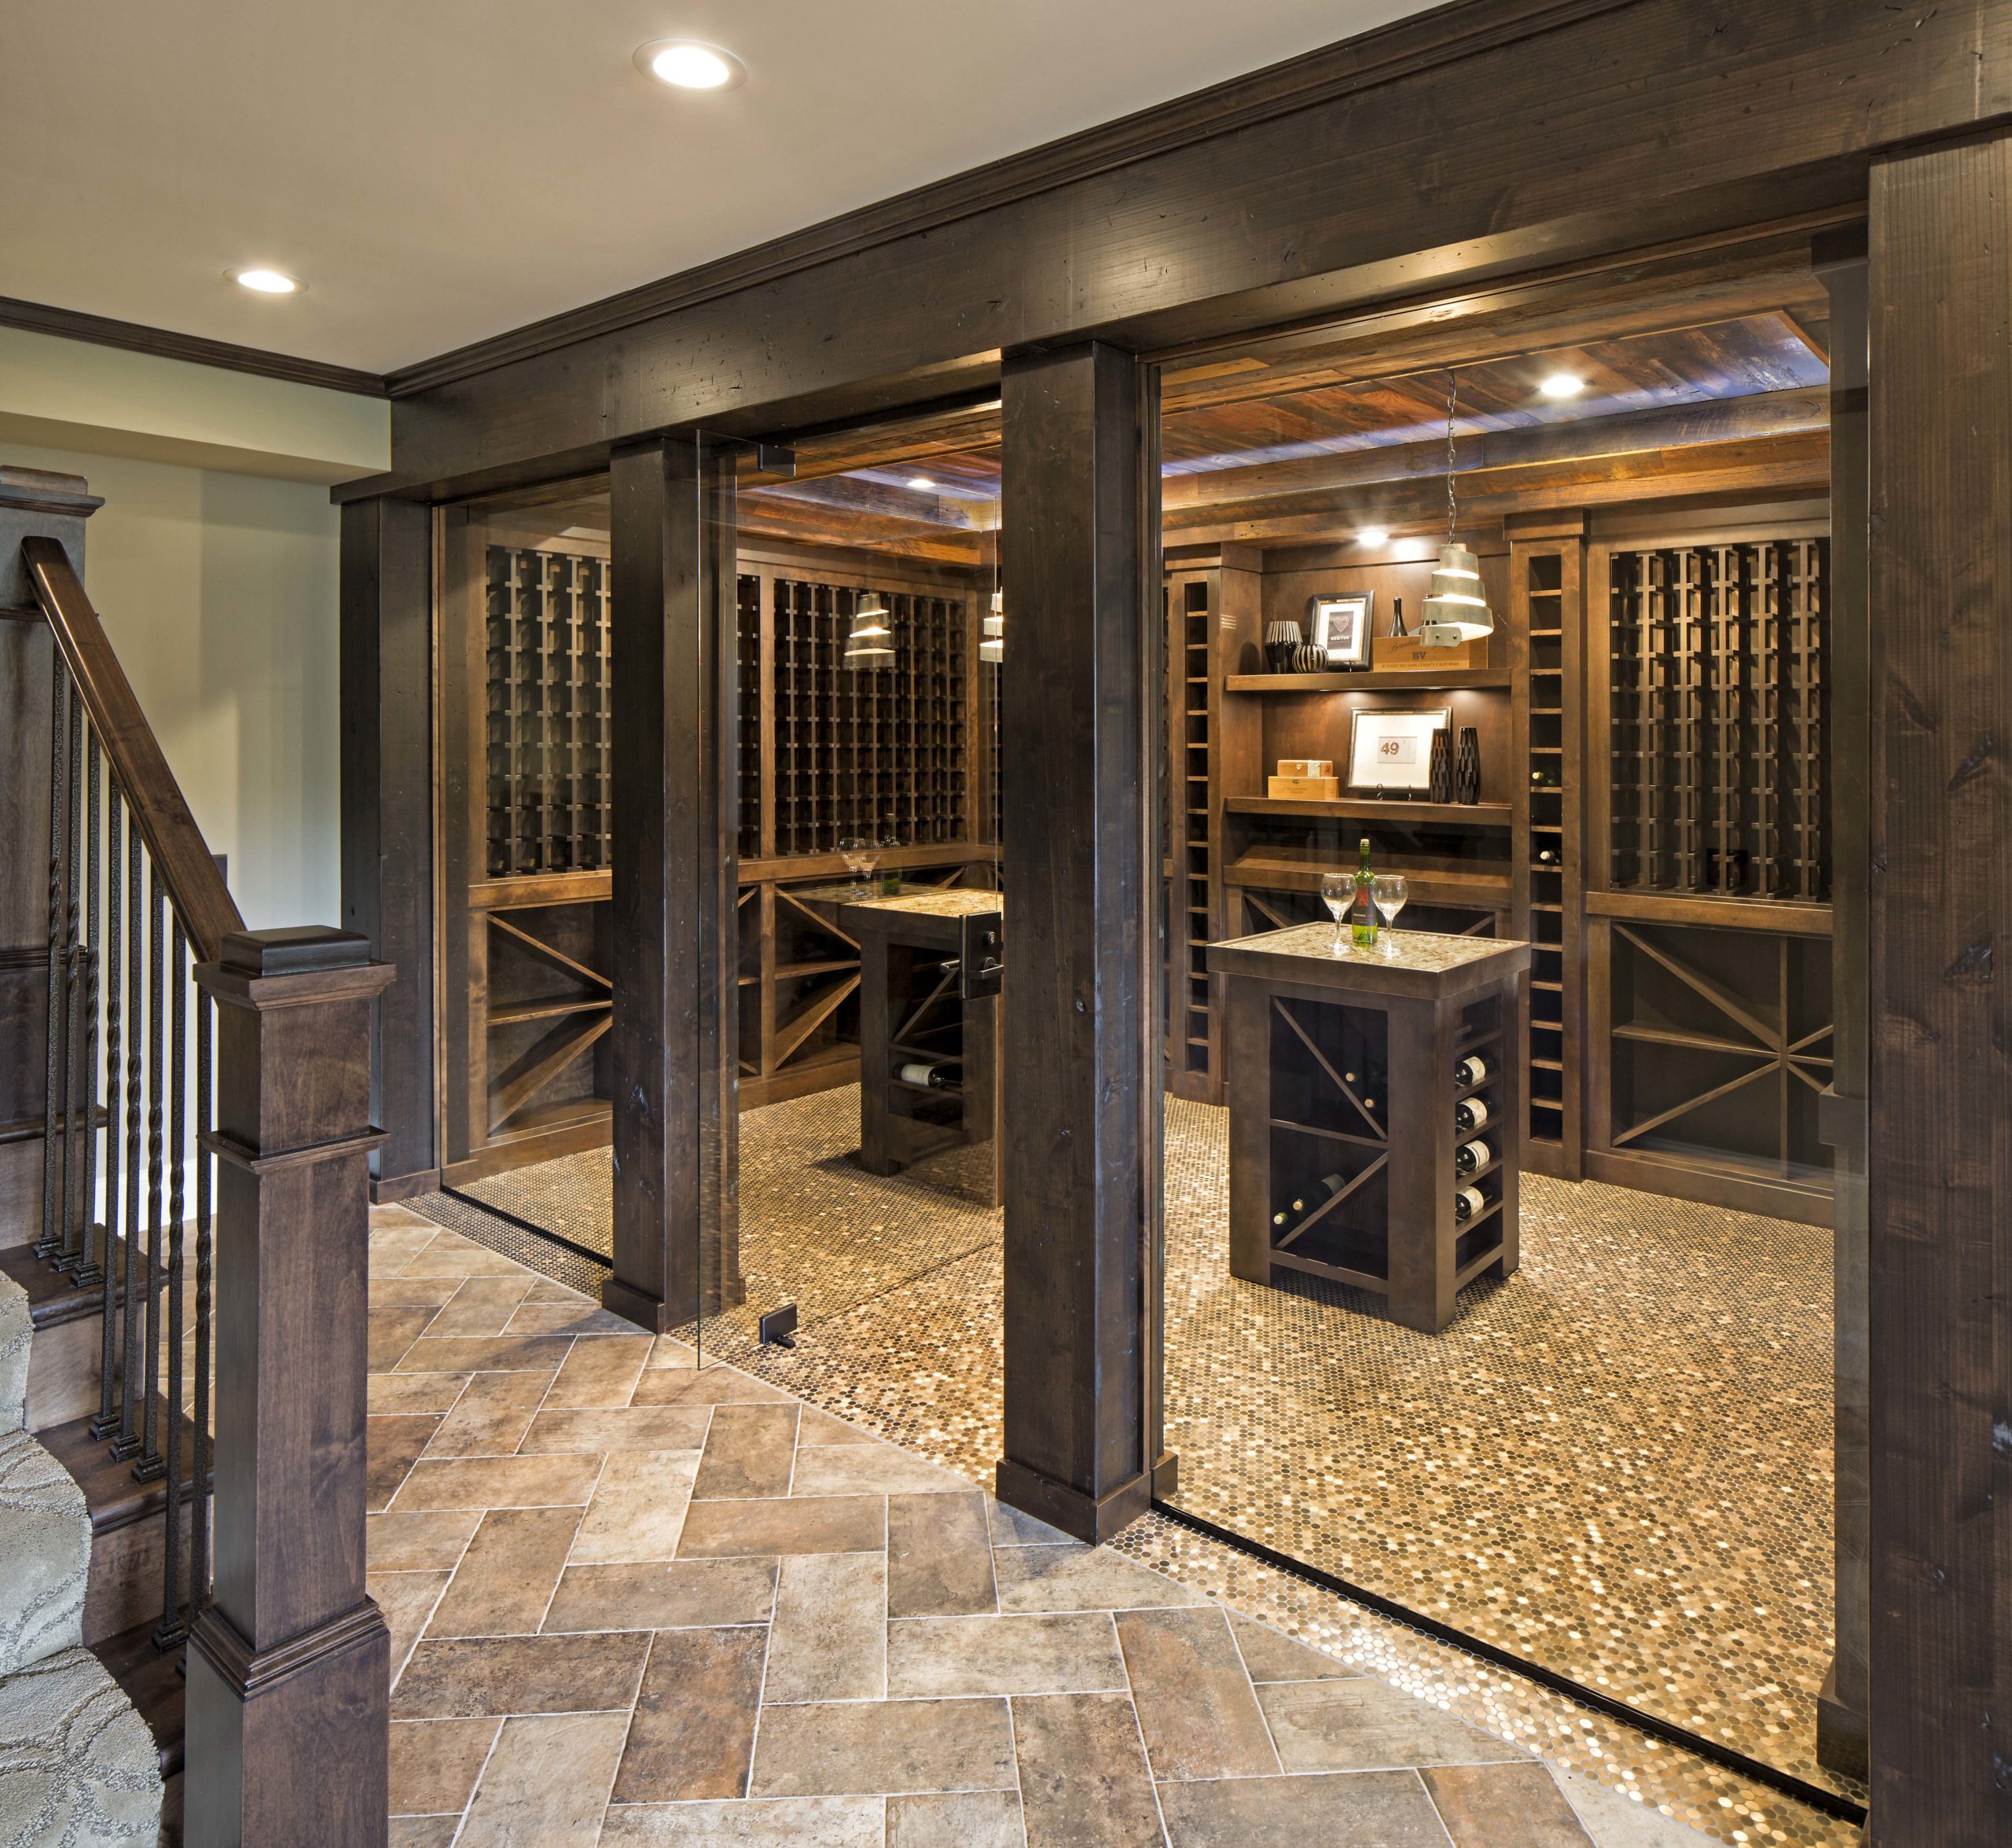 An Edina remodel featuring a wine cellar with a staircase.